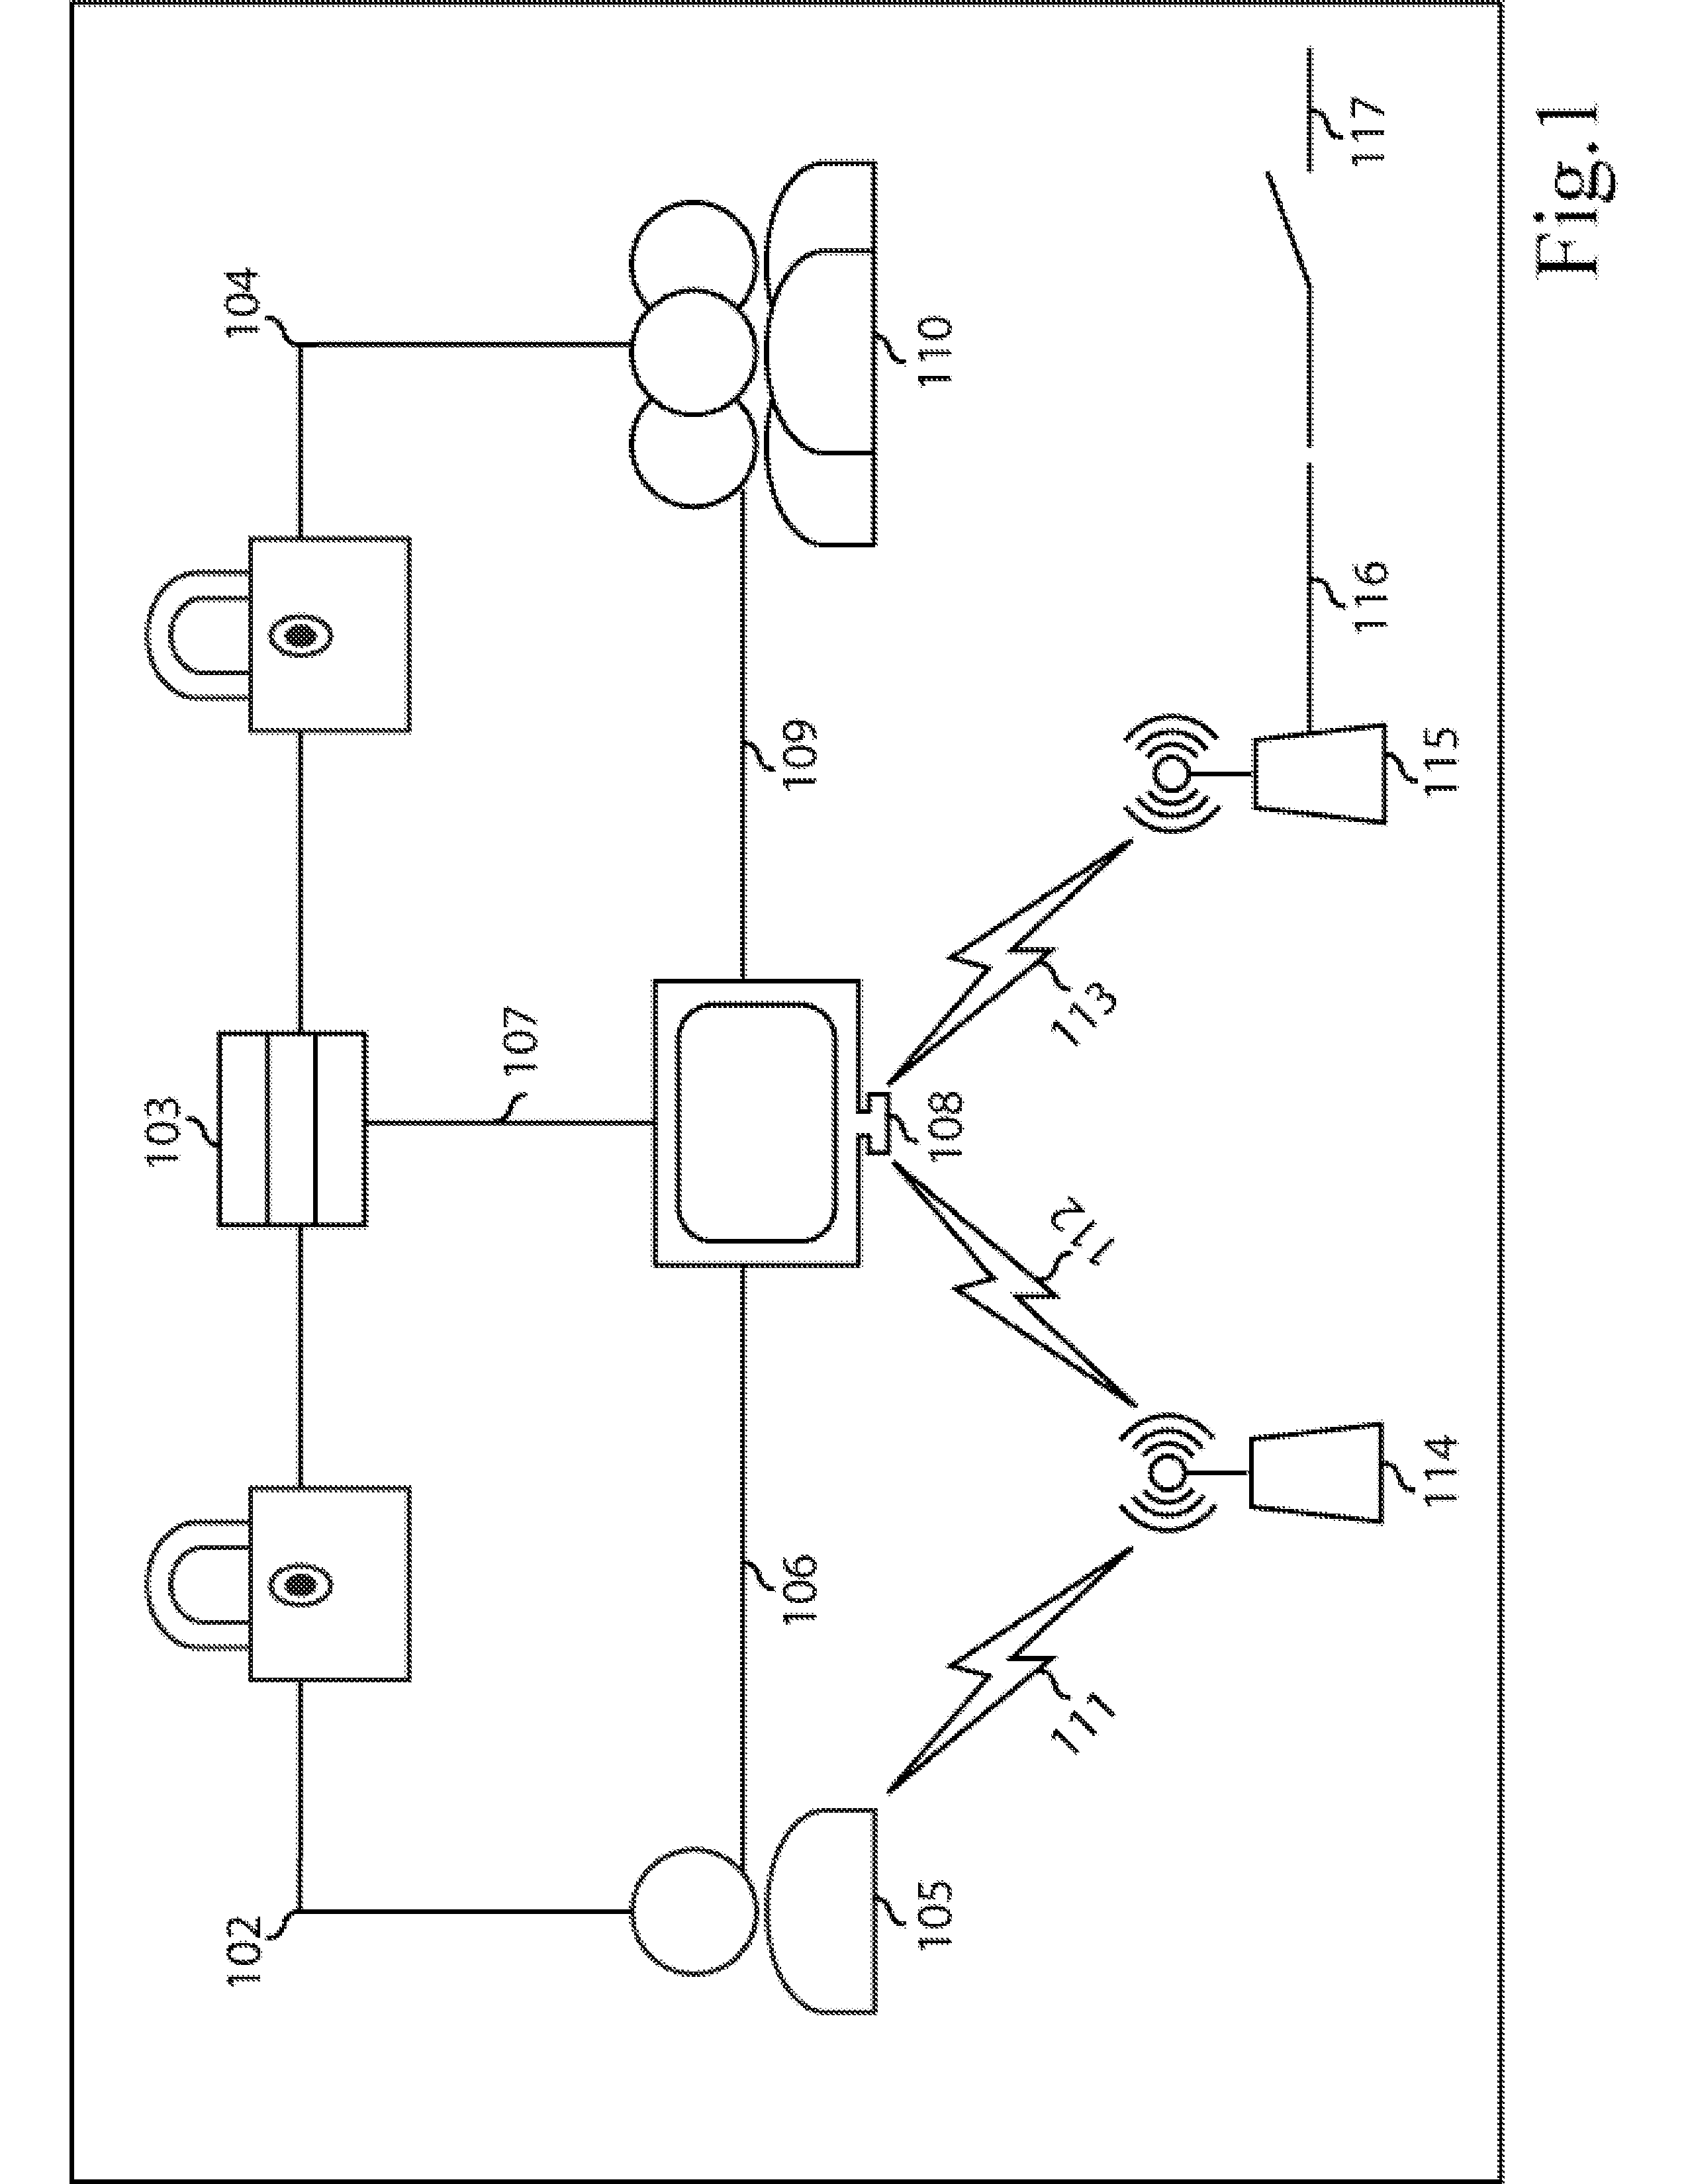 System and method for driver reaction impairment vehicle exclusion via systematic measurement for assurance of reaction time